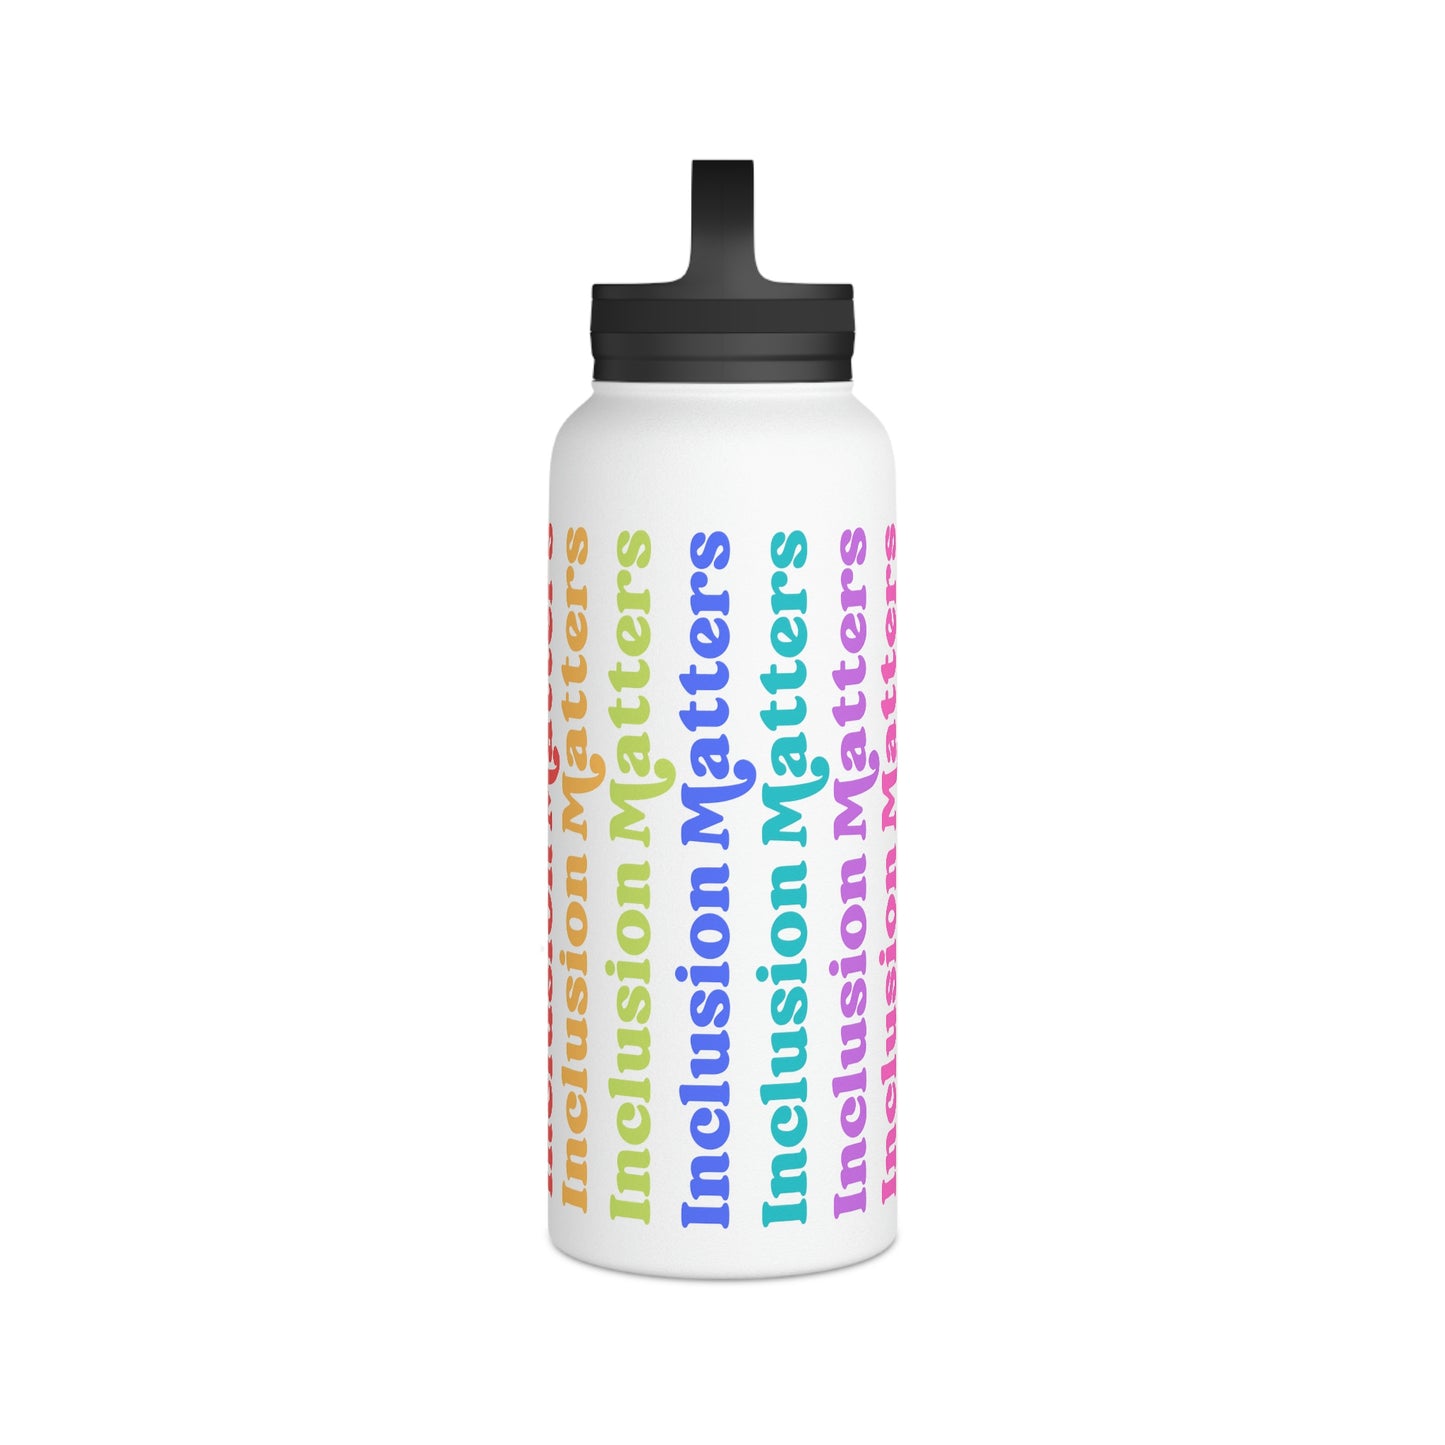 Inclusion Matters Water Bottle 32oz